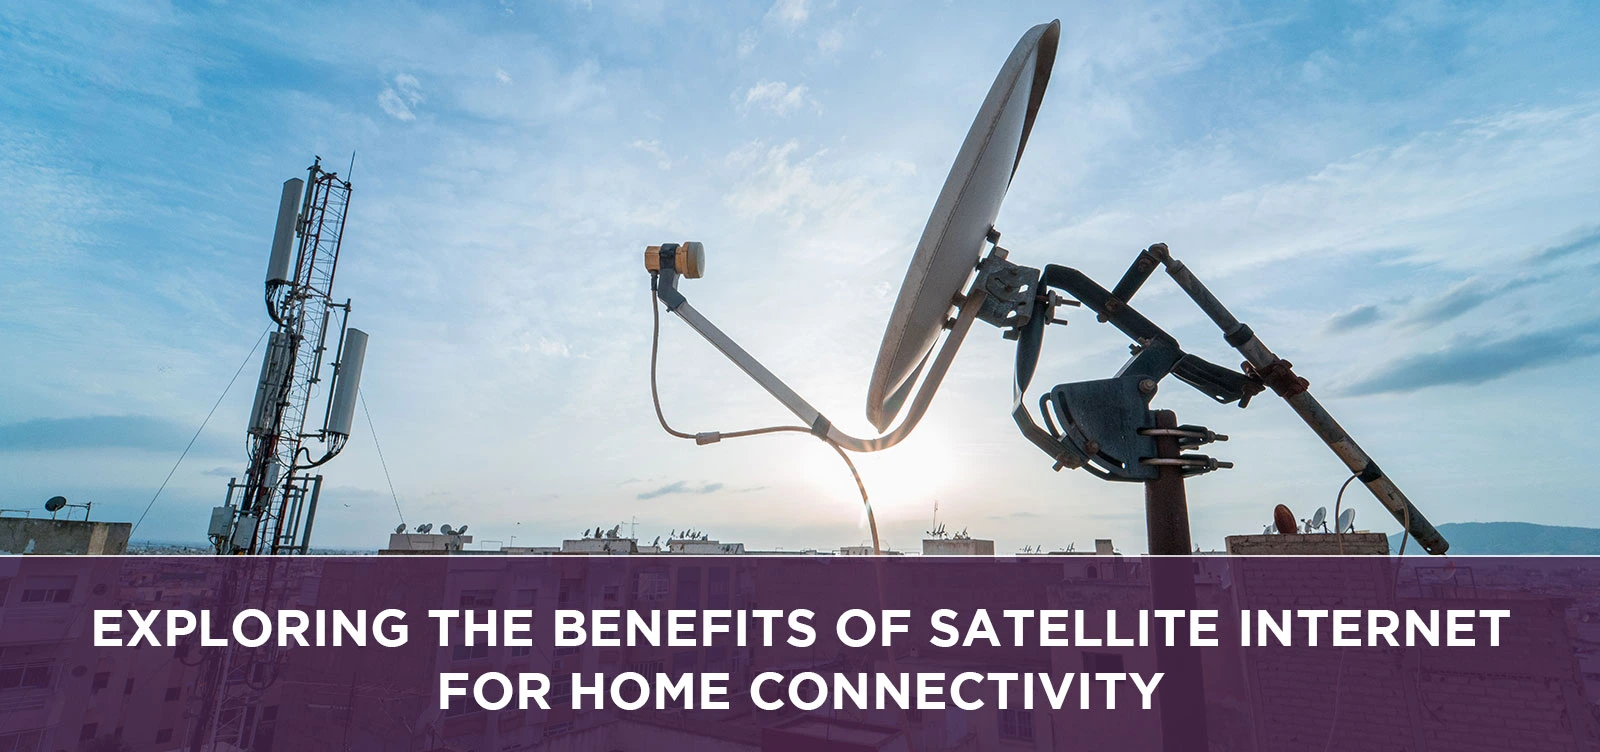 Exploring the Benefits of Satellite Internet for Home Connectivity